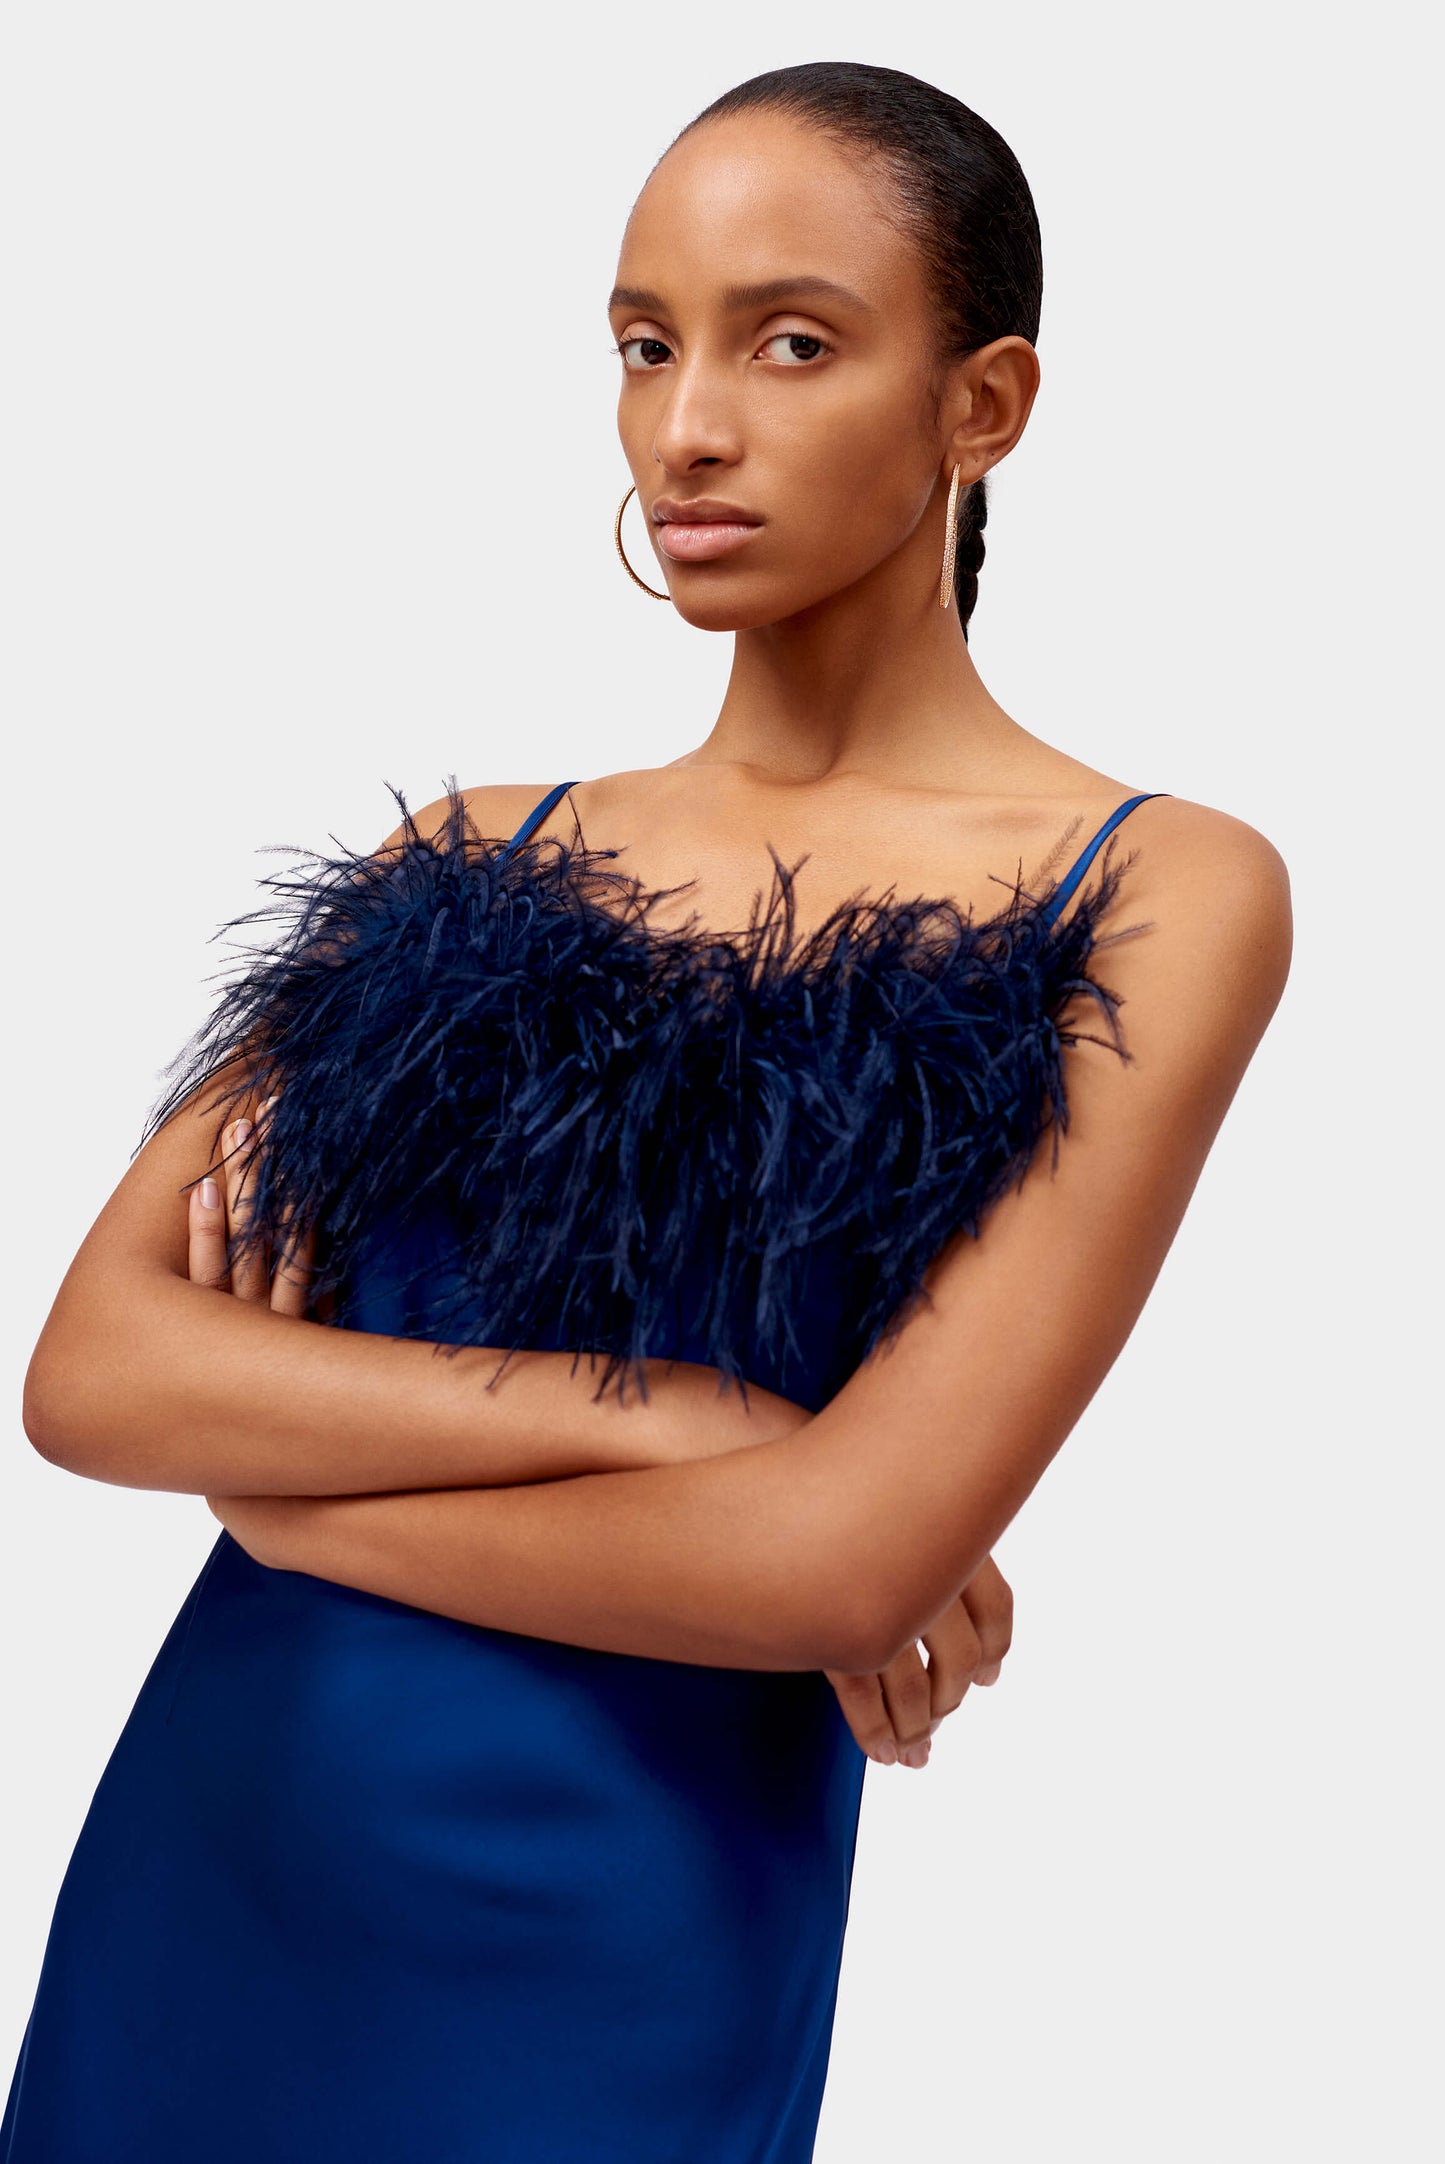 Boheme Mini Slip Dress with Feathers in Navy